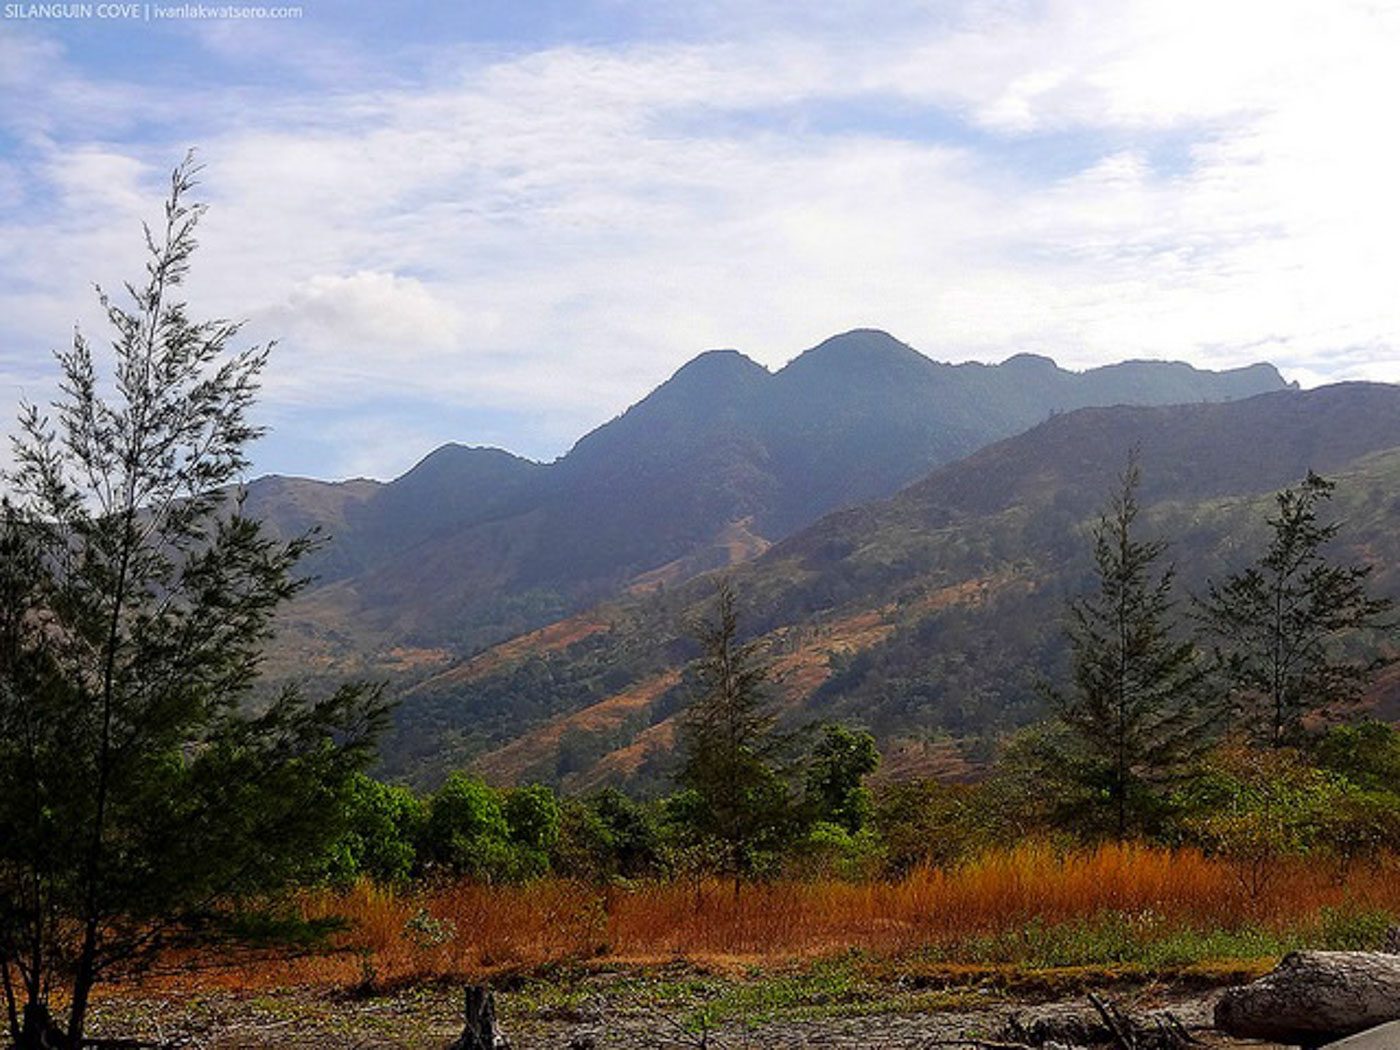 MOUNTAIN VIEW. What separates Silanguin from the rest of Zambales are scenic mountains. Photo by Ivan Briñas Cultura 